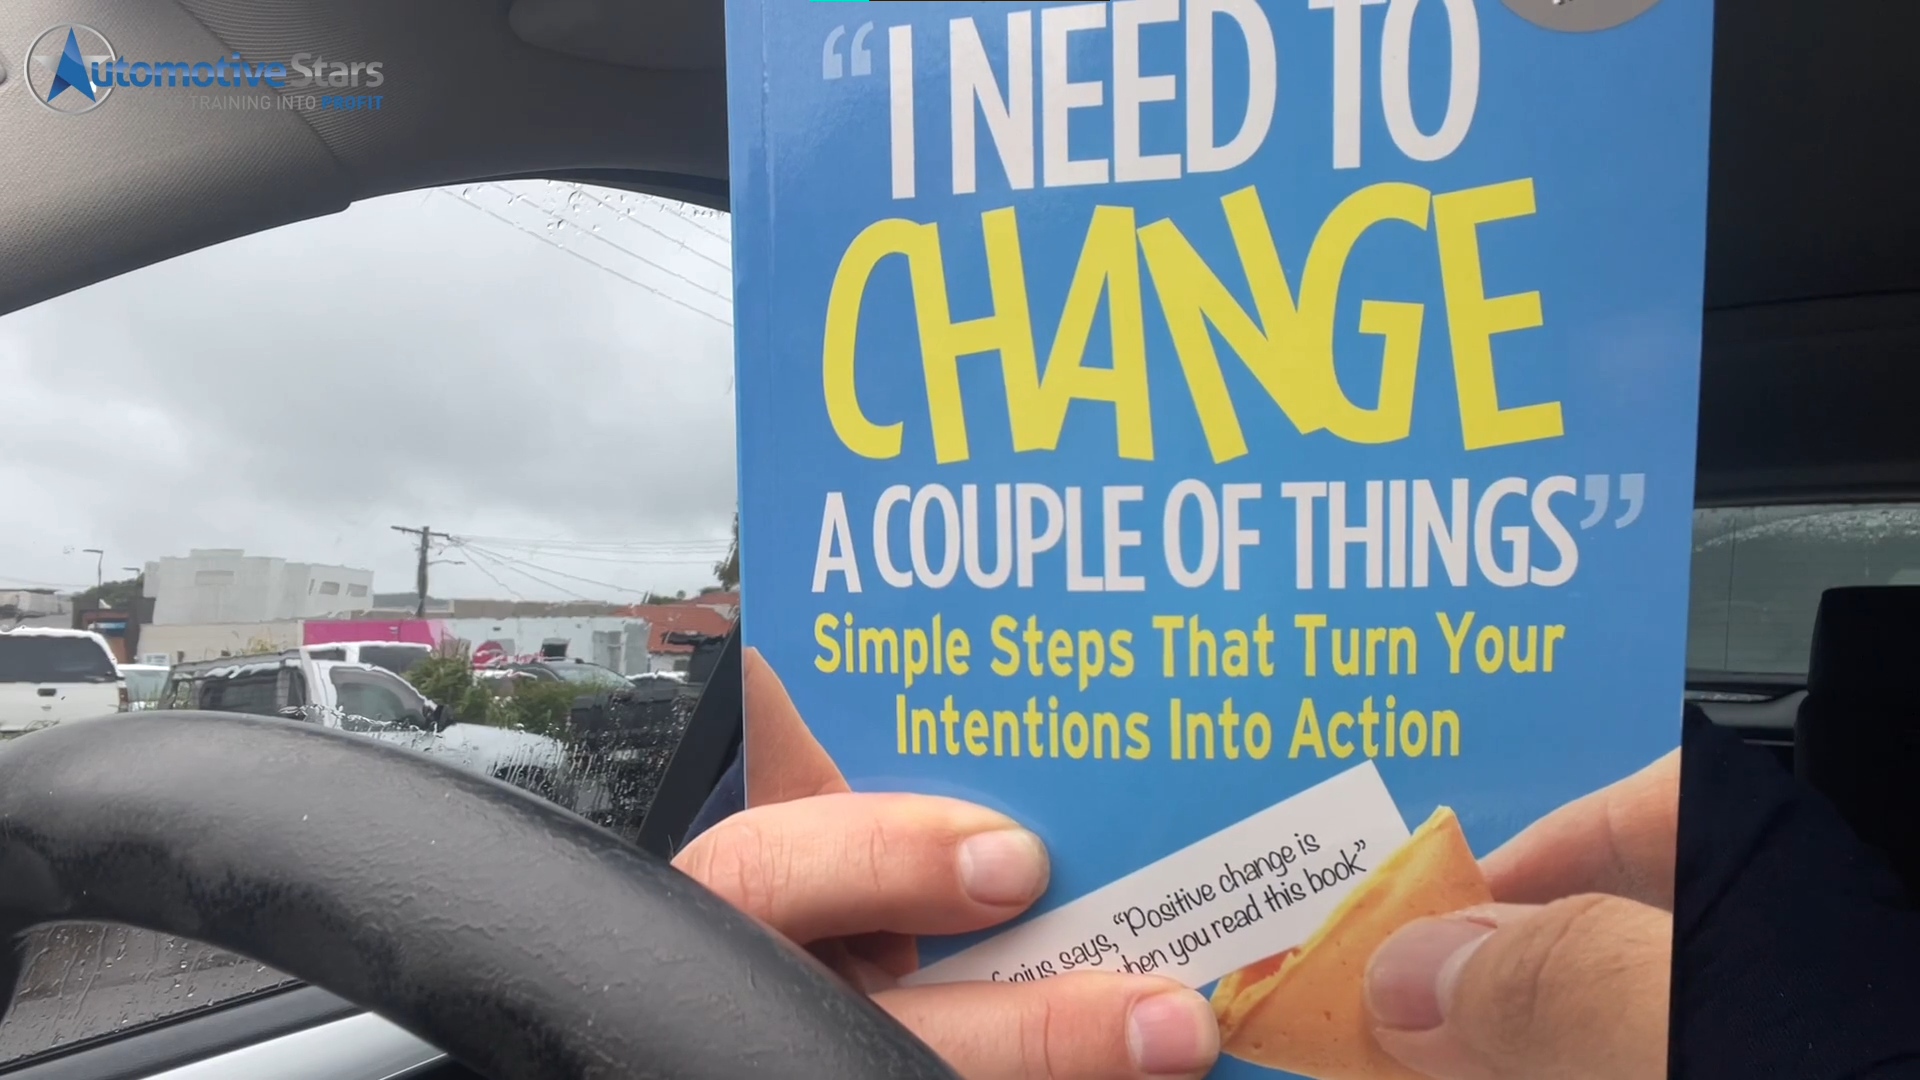 Guarantees in Life: Death, Taxes and Change — Have a copy of my book "I Need to Change a Couple of Things"